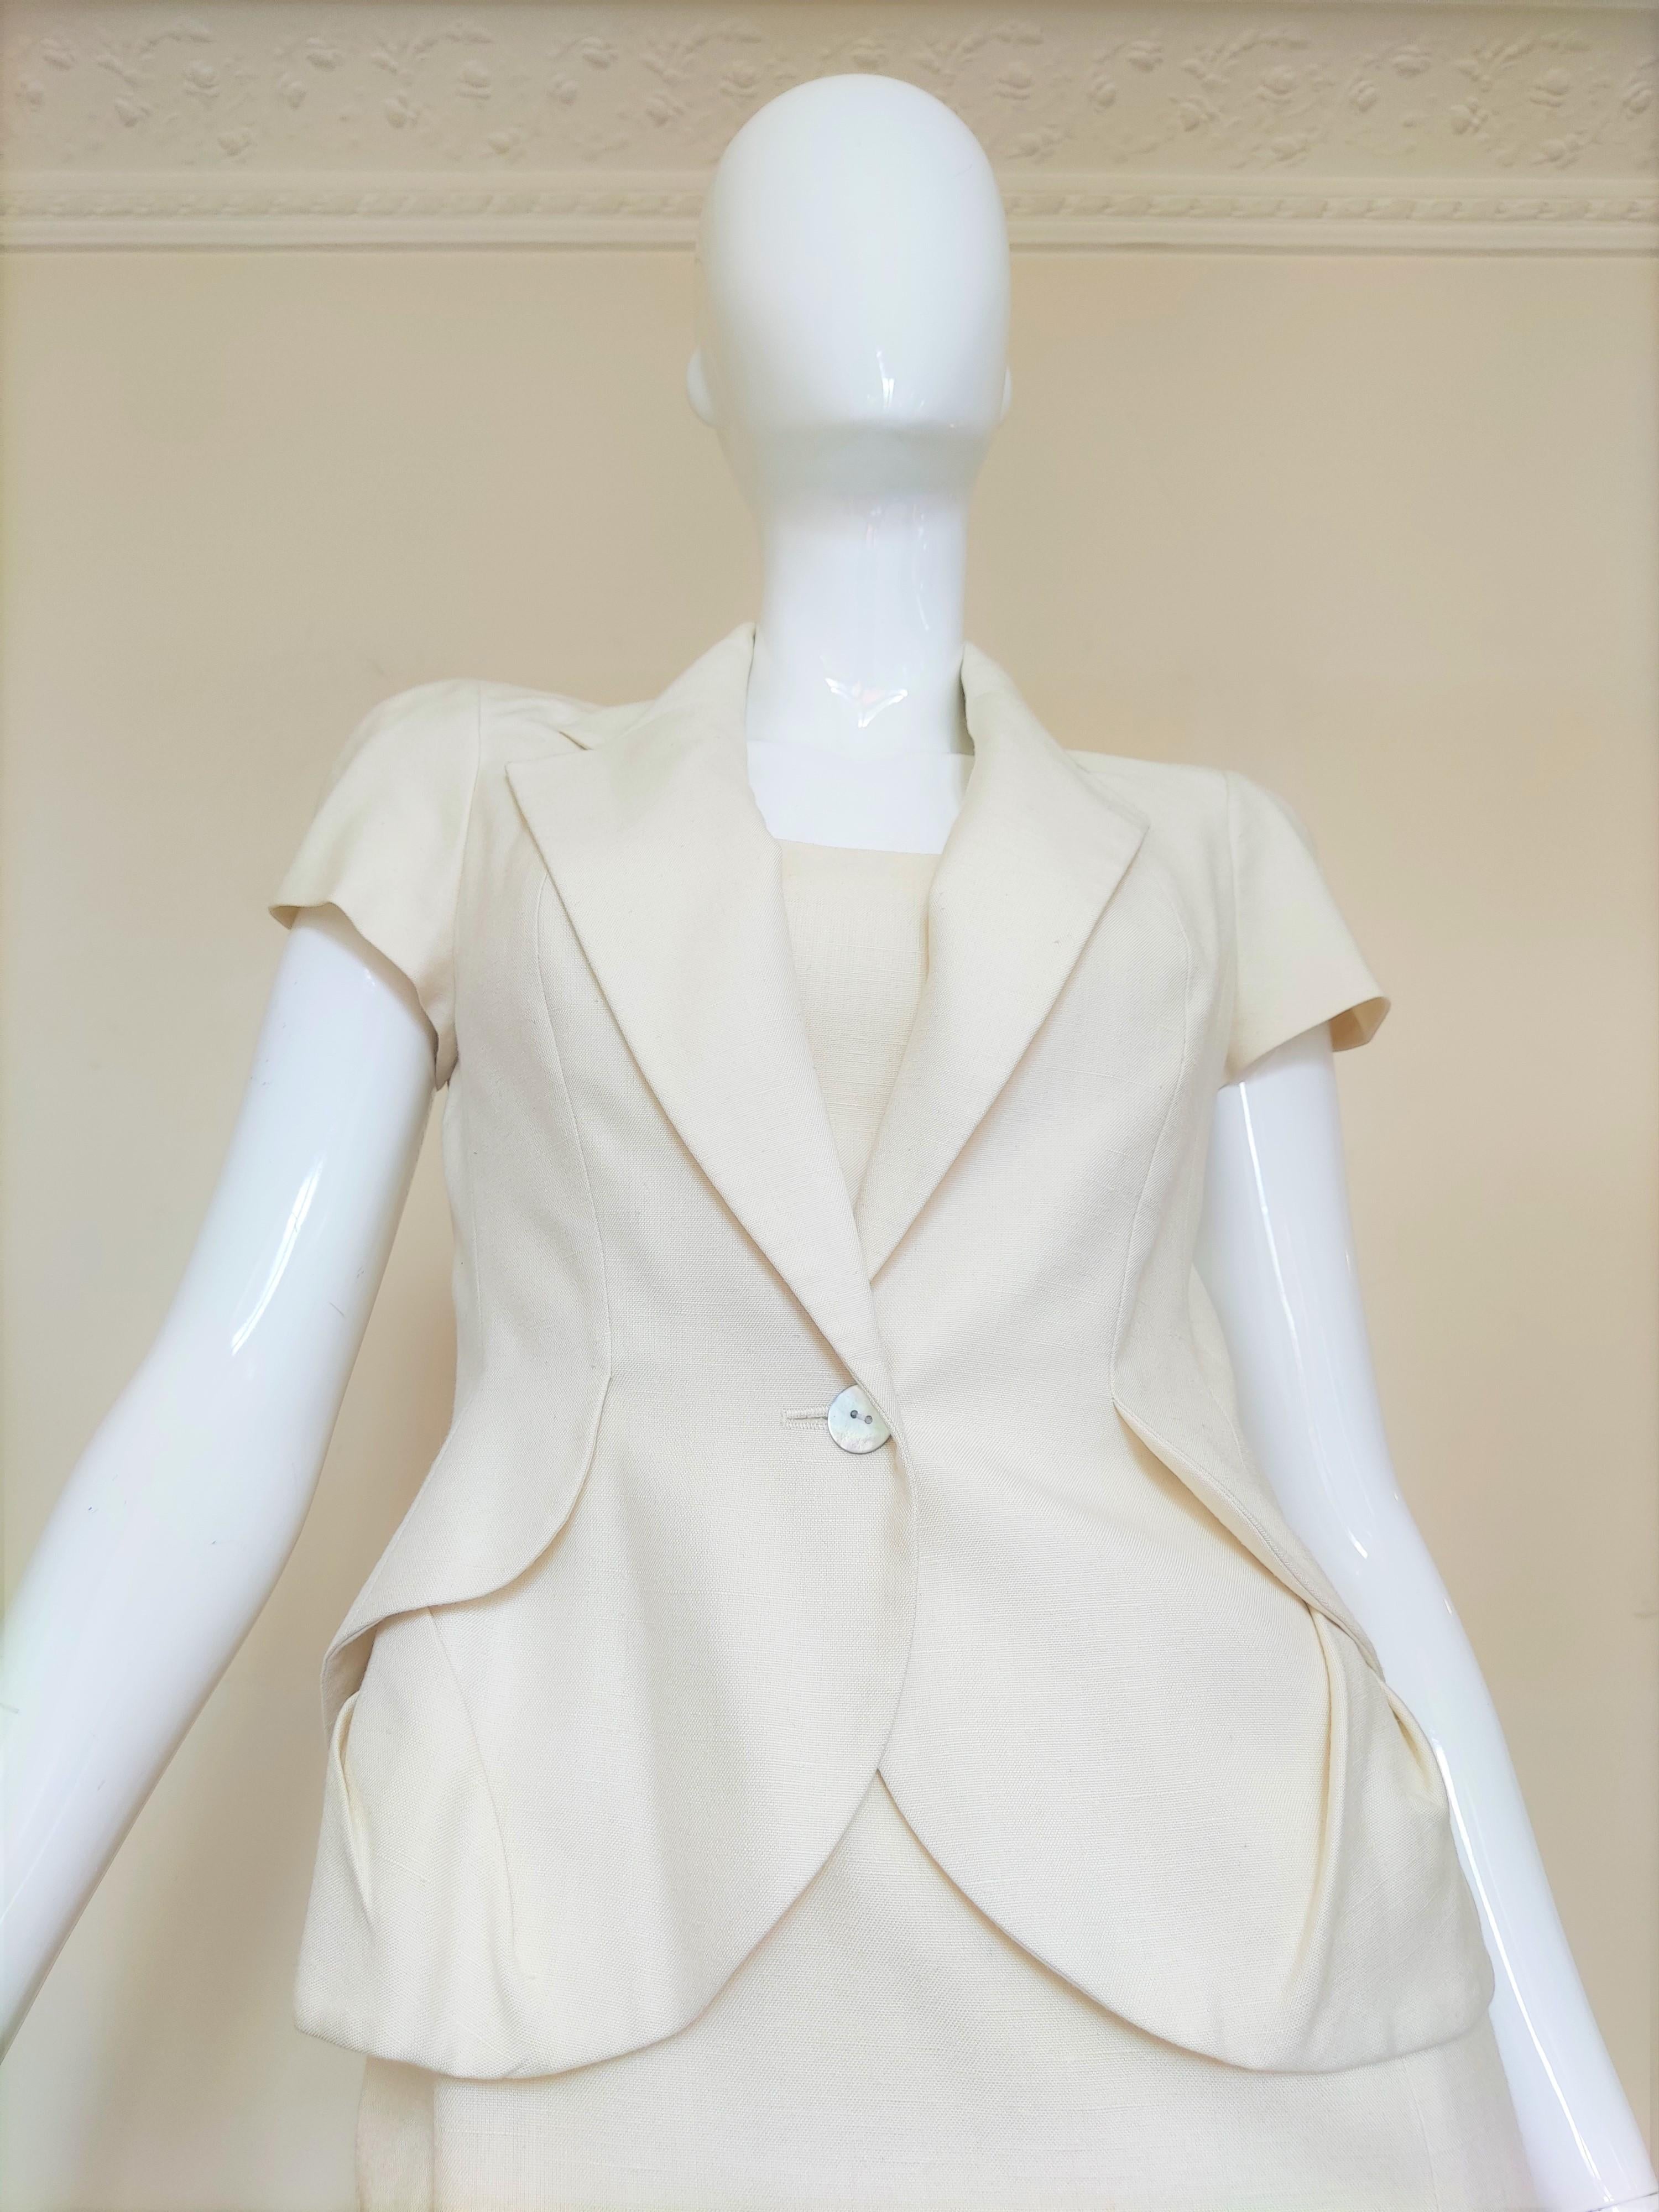 Early John Galliano S/S 1999 Runway Vintage Ivory Ensemble Dress Costume Suit For Sale 2